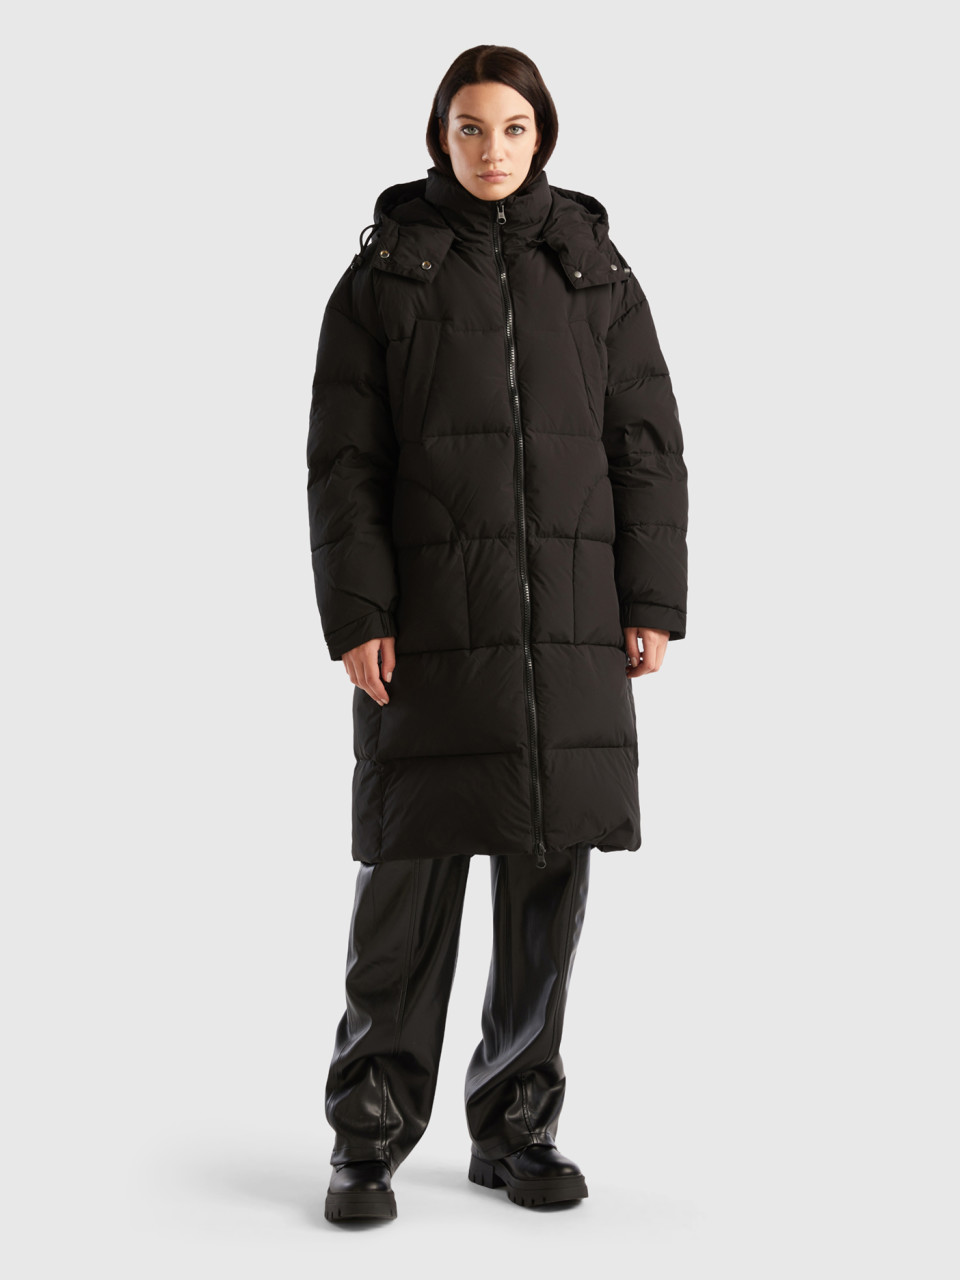 Benetton, Long Padded Jacket With Removable Hood, Black, Women